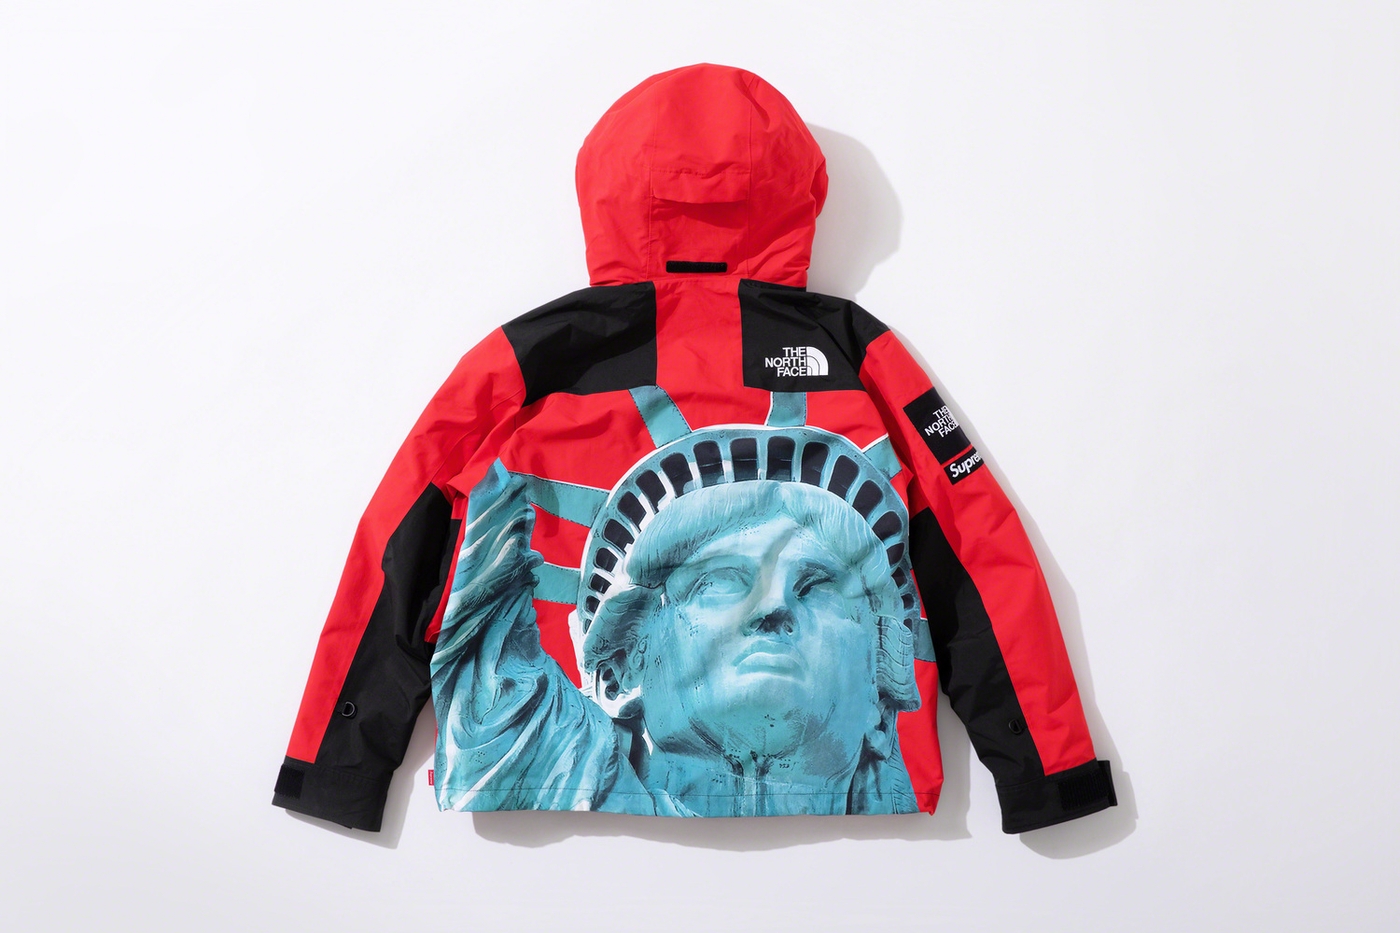 Statue of Liberty Mountain Jacket with packable hood. (16/29)